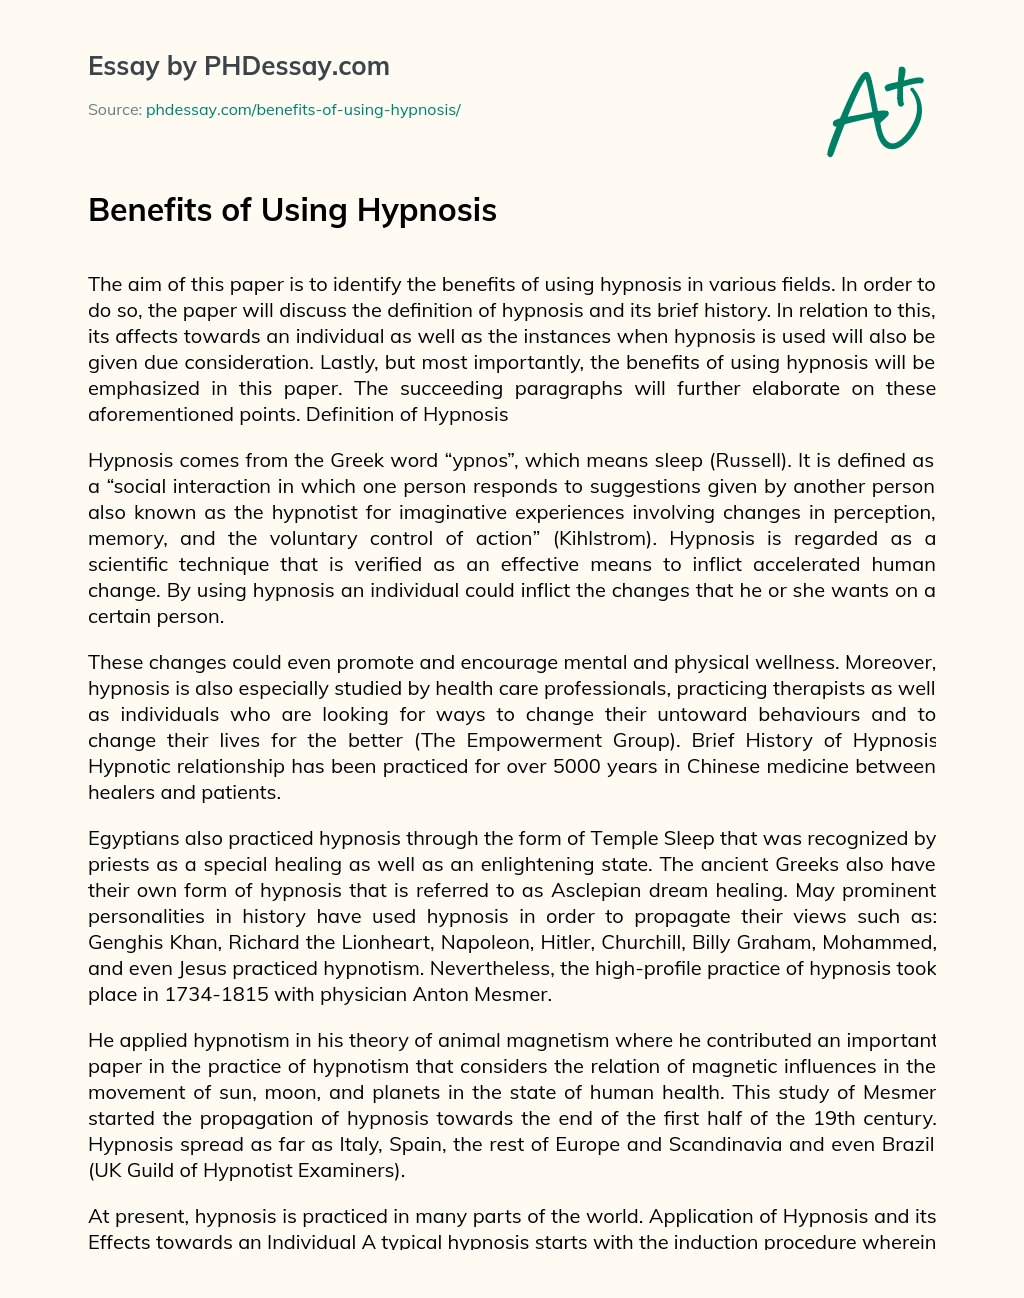 Benefits of Using Hypnosis essay